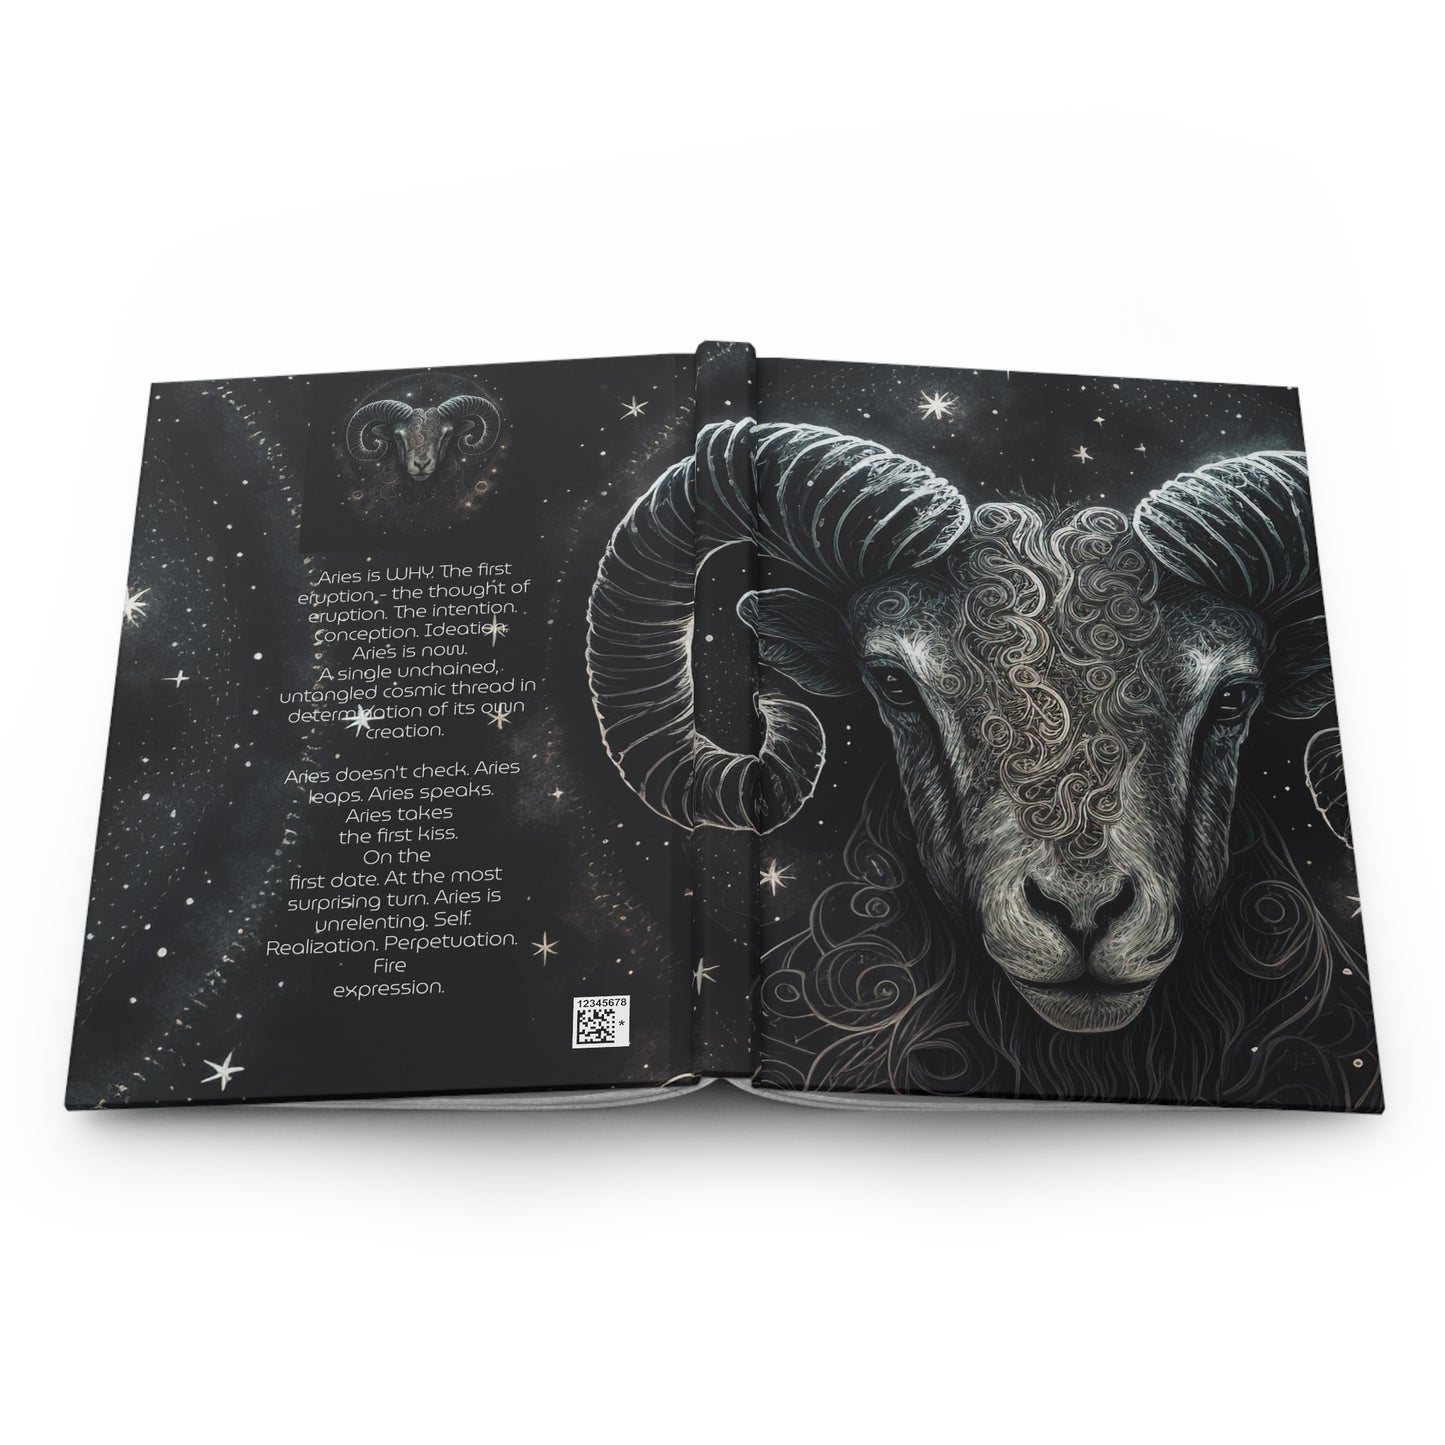 Aries in the Stars with Aries Poem Hardcover 150 Page Journal